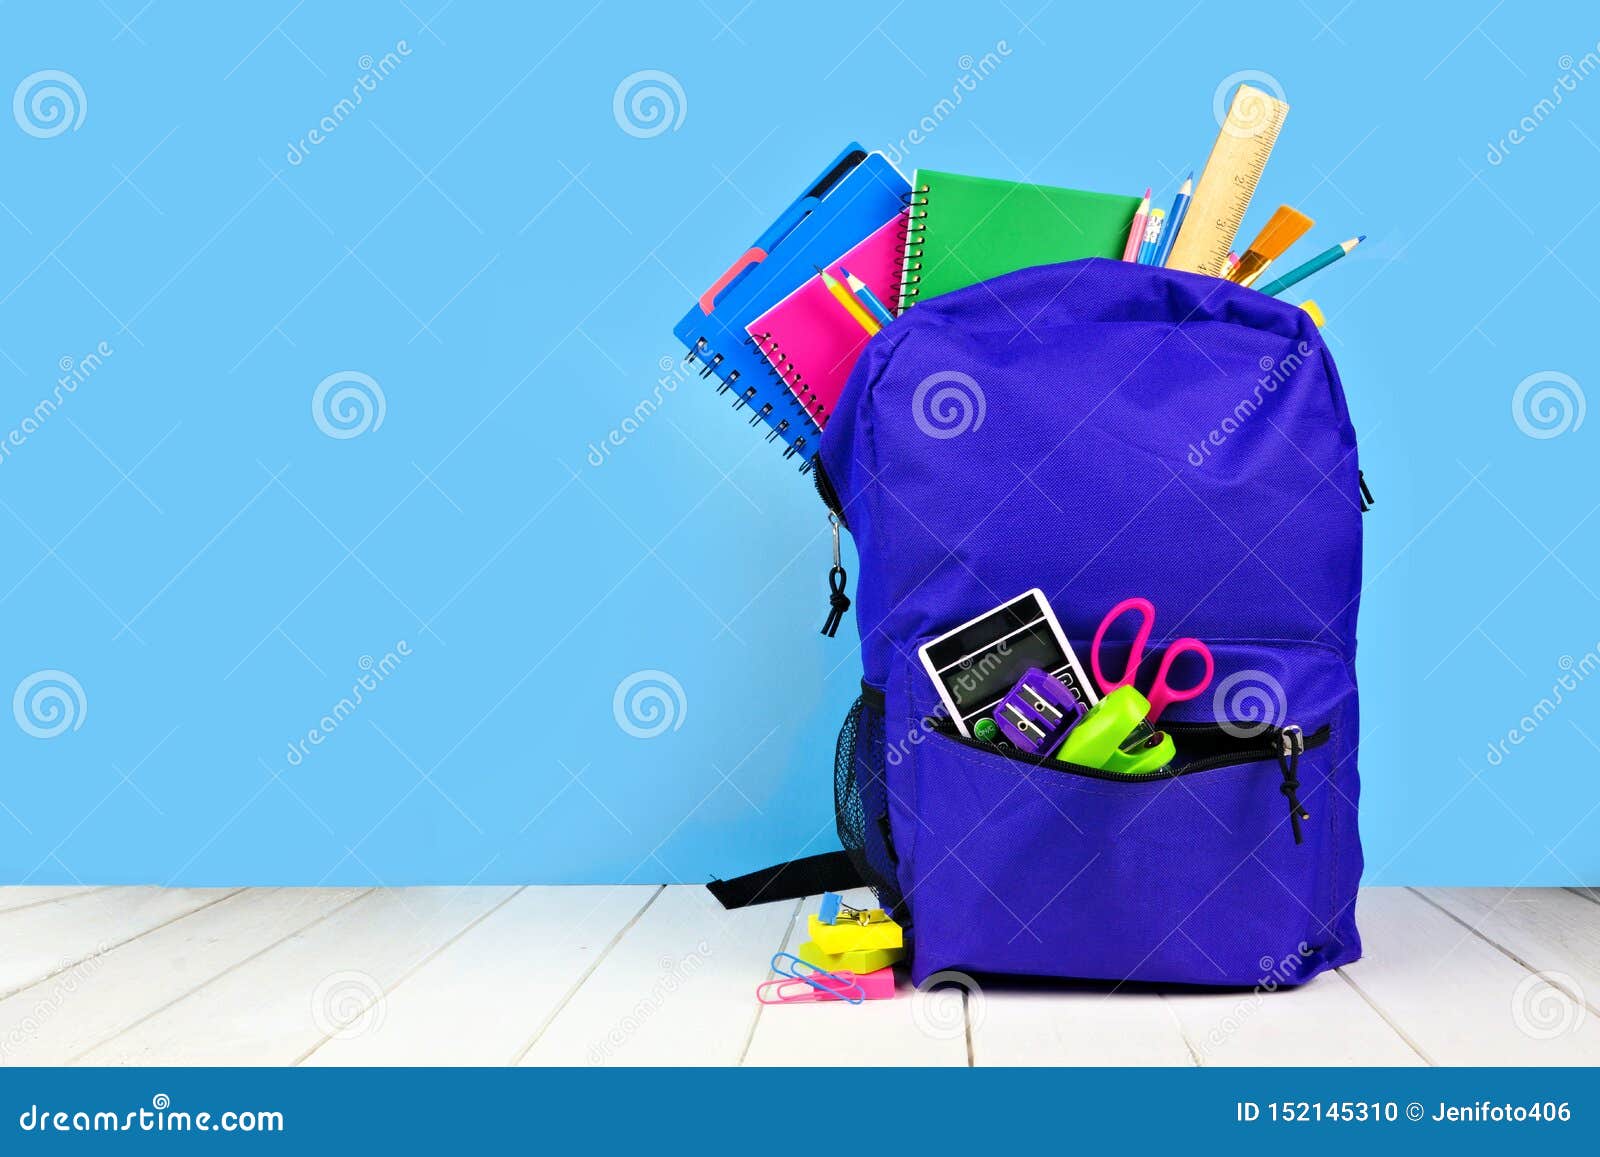 purple backpack full of school supplies against a blue background. back to school.